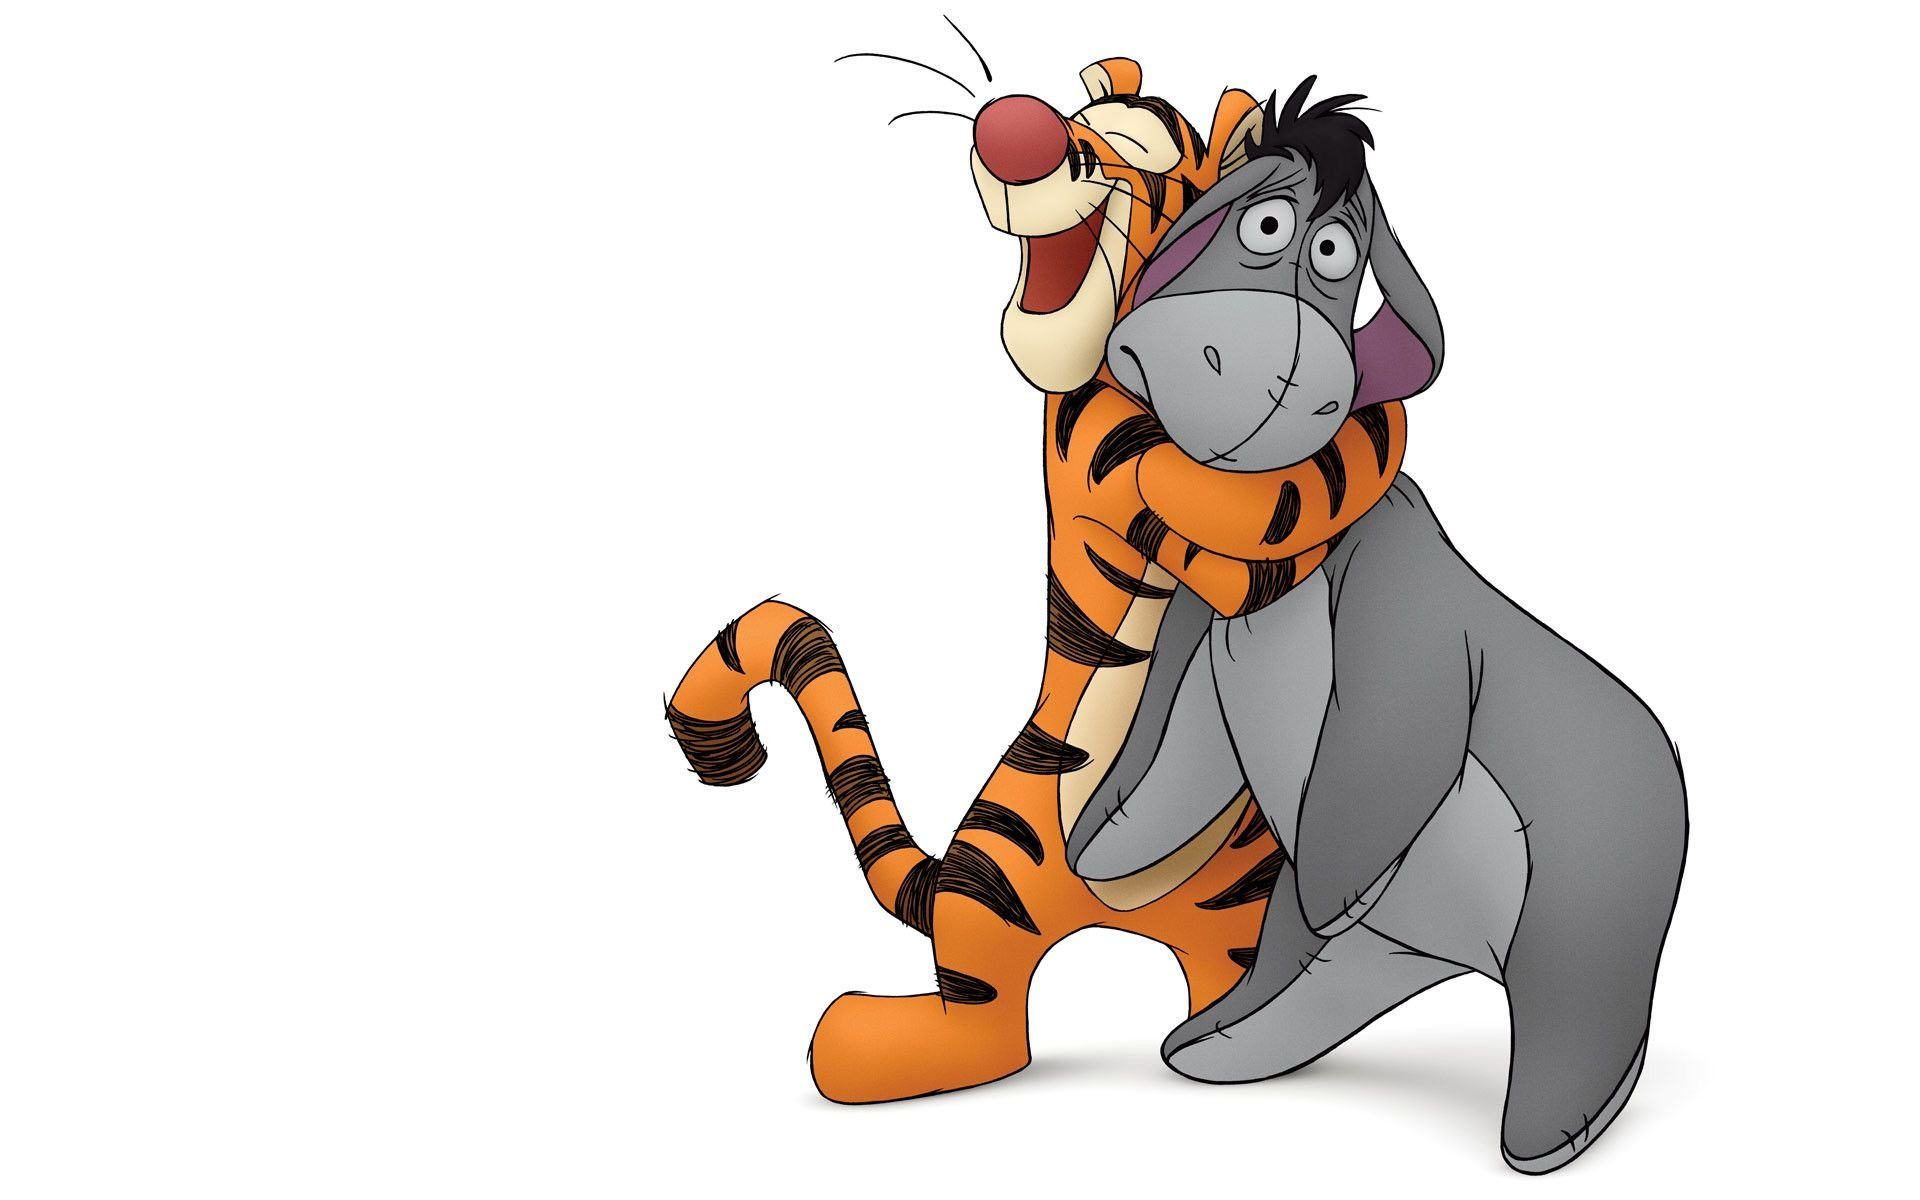 1920x1200 Disney Winnie The Pooh Tigger Wallpaper Image For Android posted by Samantha Cunningham